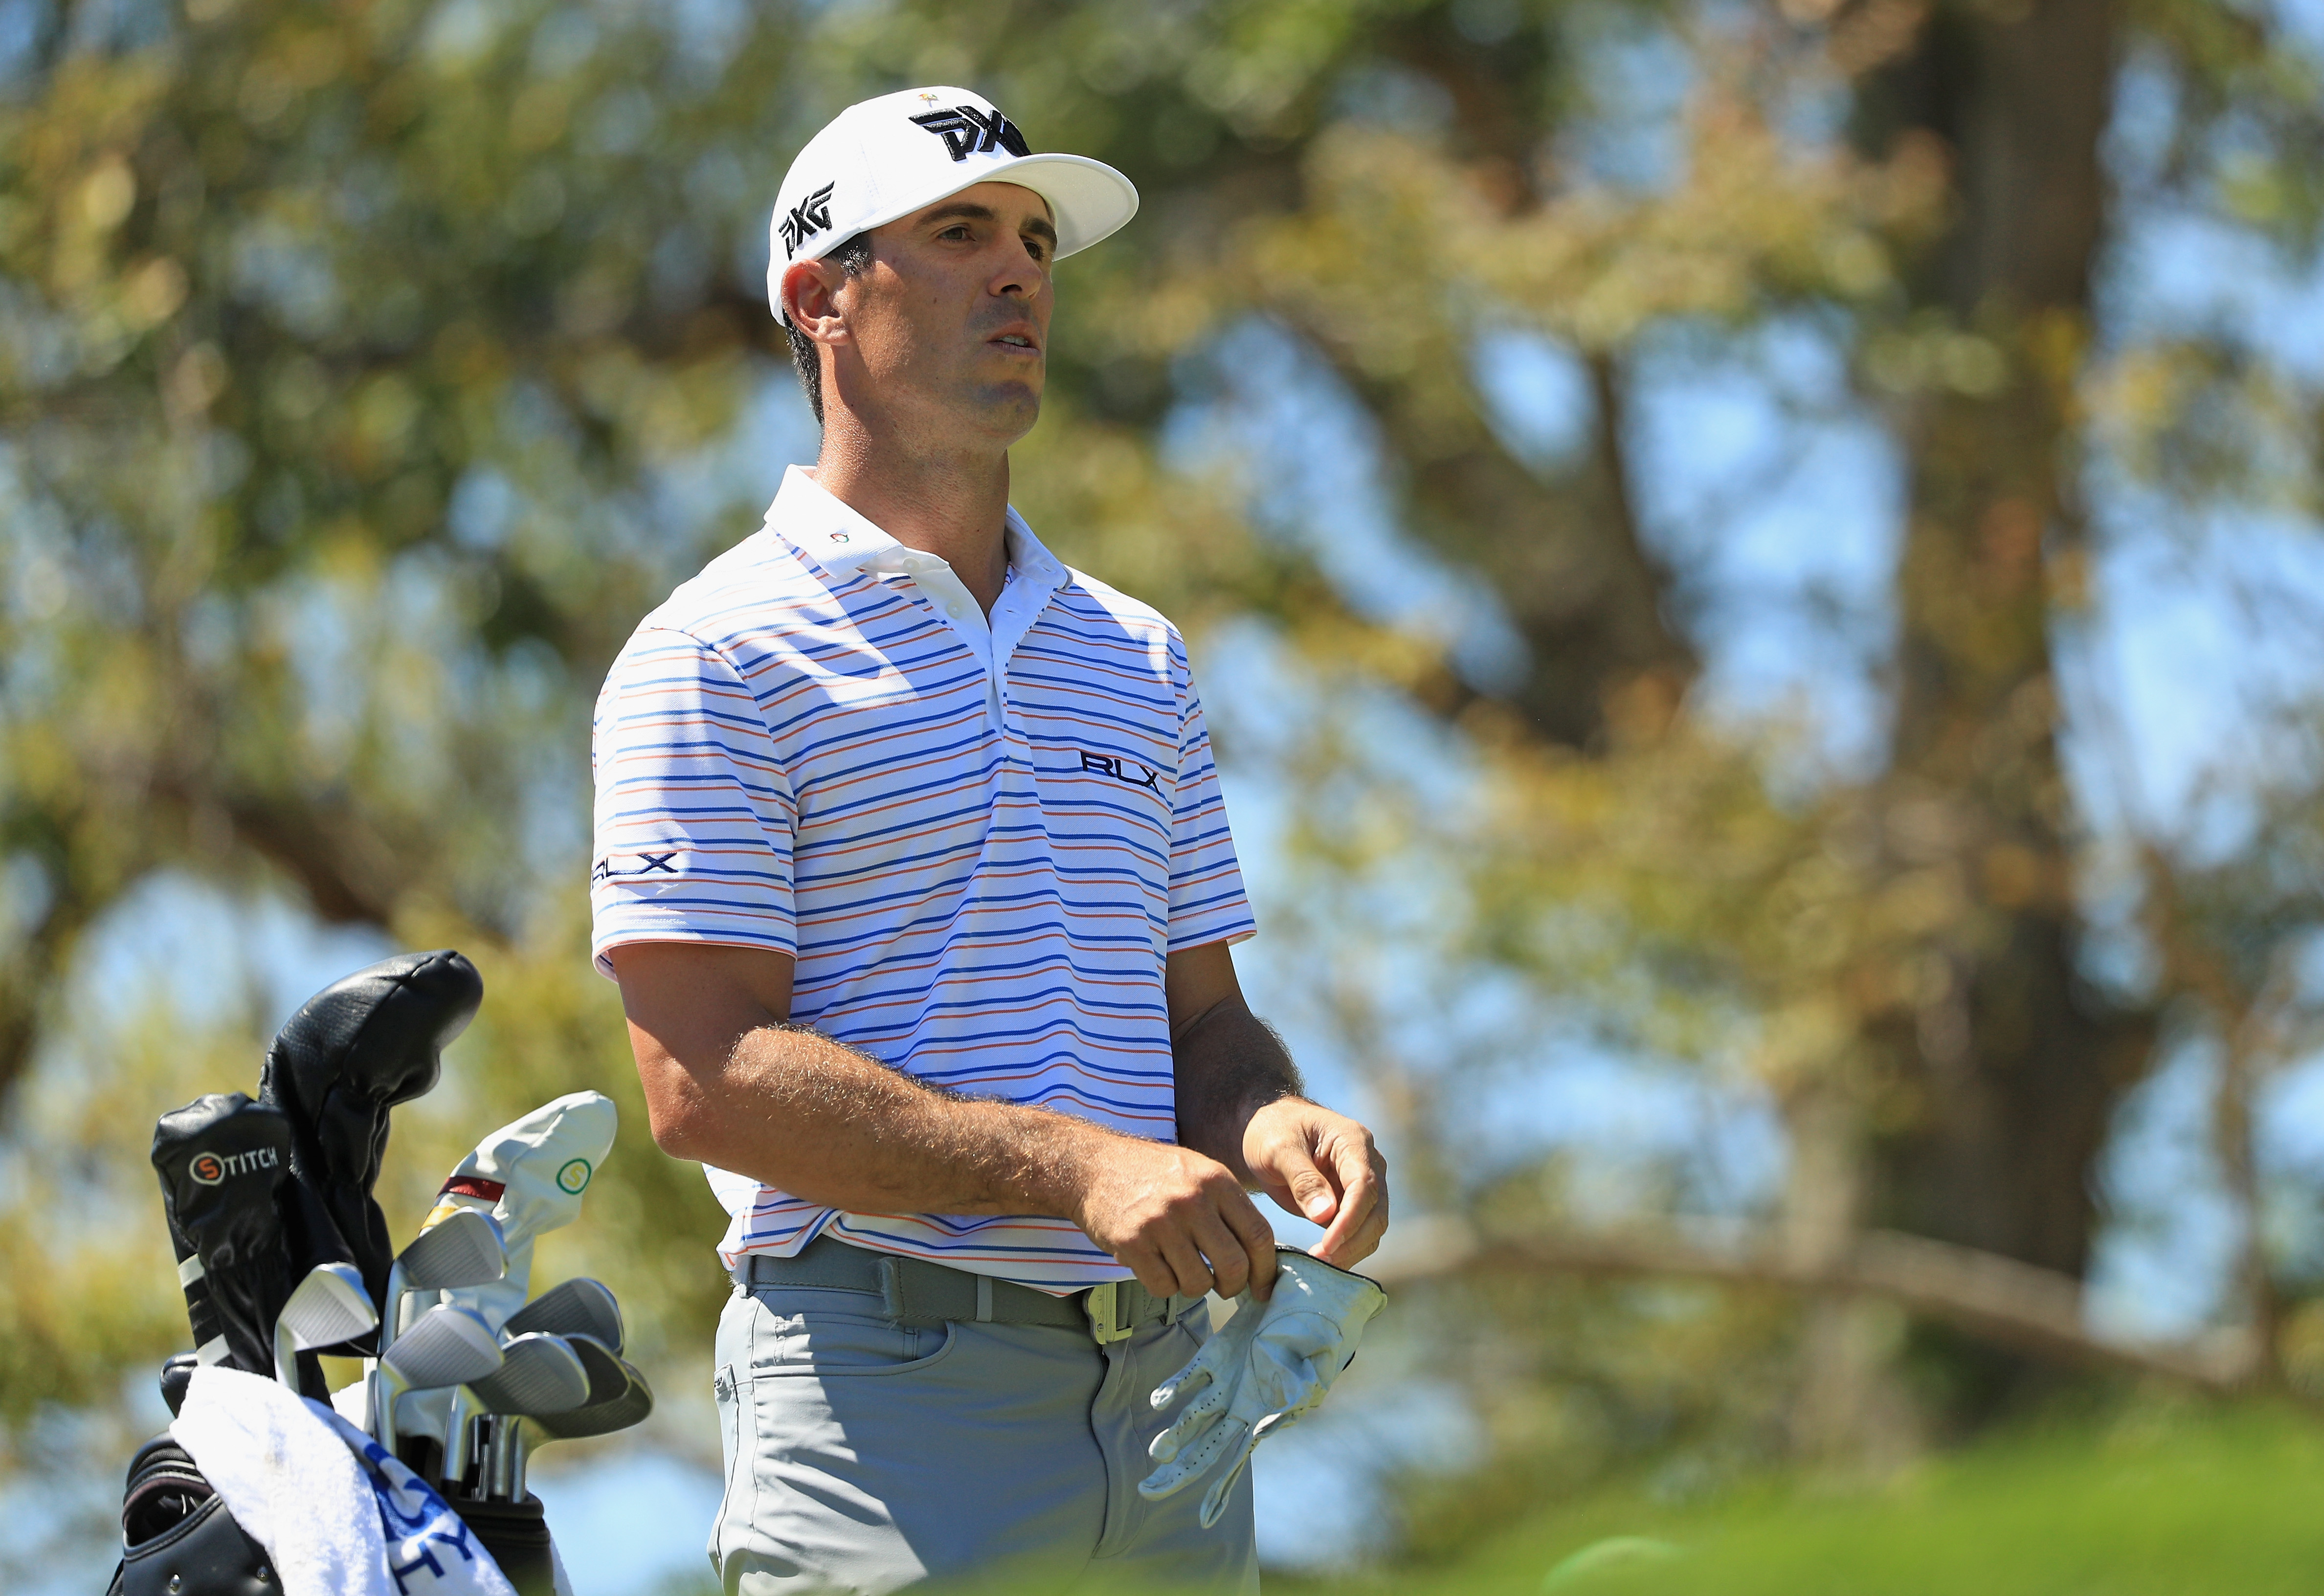 Horschel: We're one incident away from a player going into the crowd